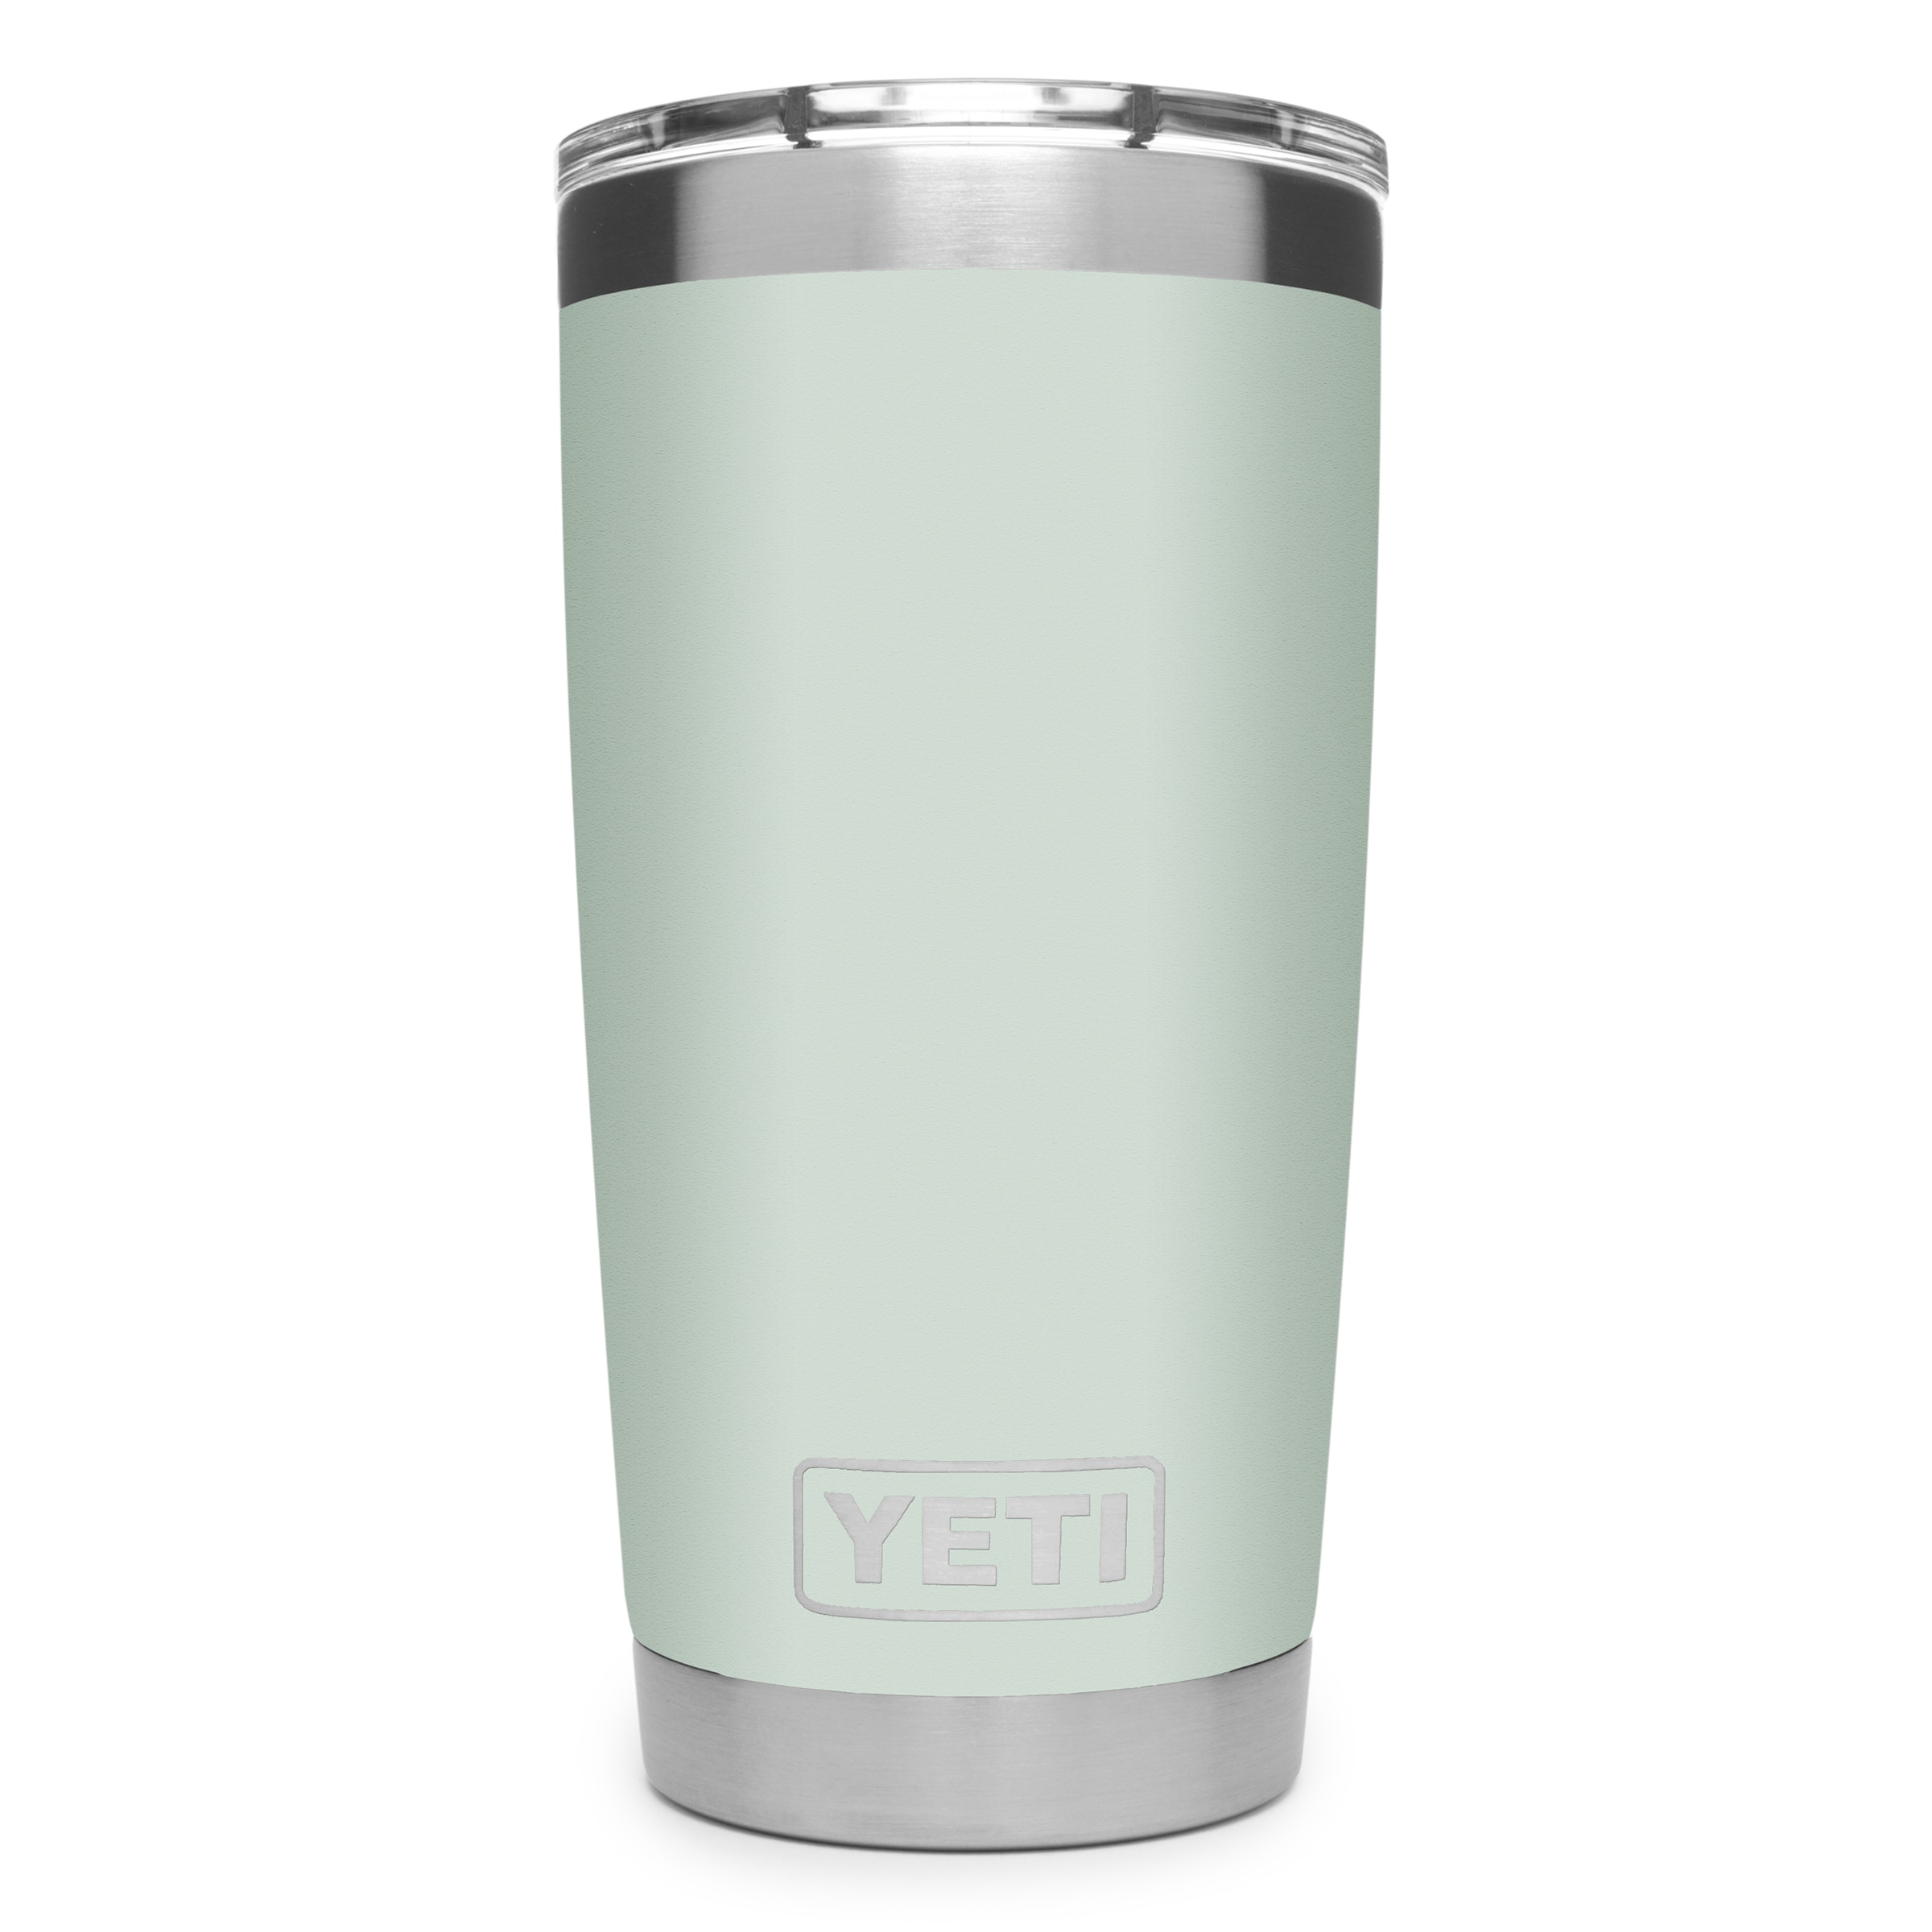 Yeti Rambler 20 Oz. Olive Green Stainless Steel Insulated Tumbler - Gillman  Home Center